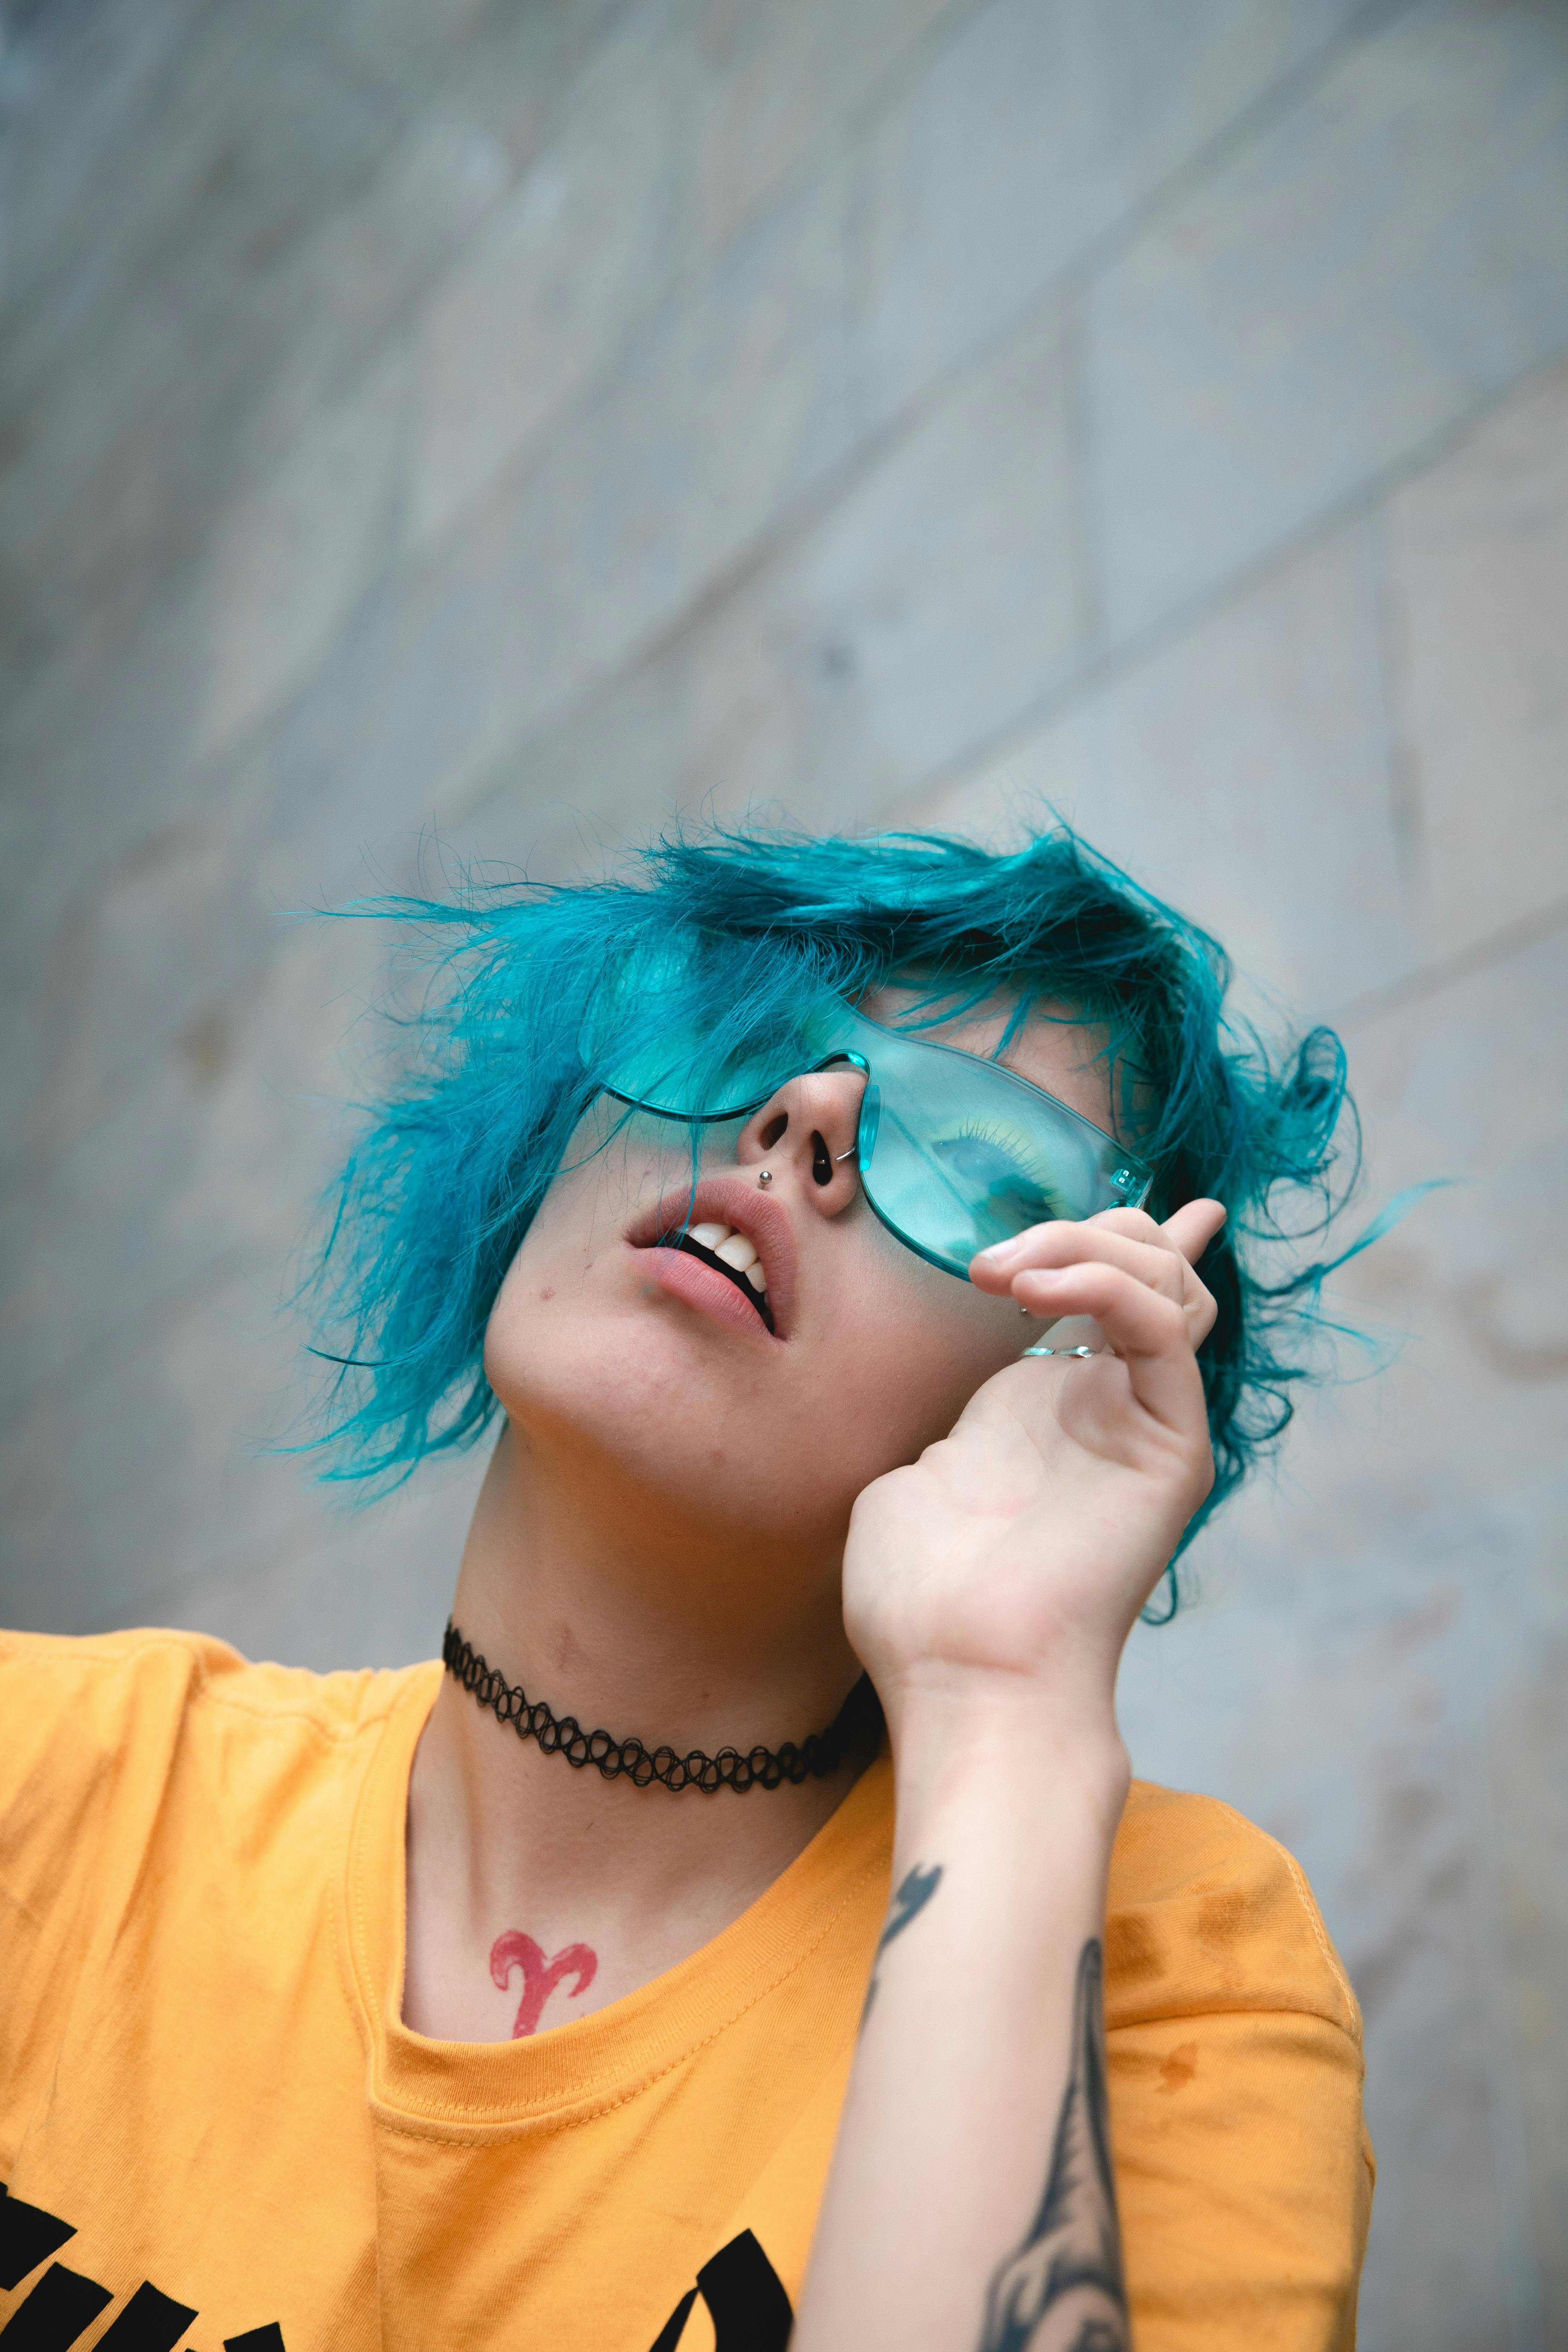 Cool young woman with blue hair and a septum piercing stock photo (254275)  - YouWorkForThem